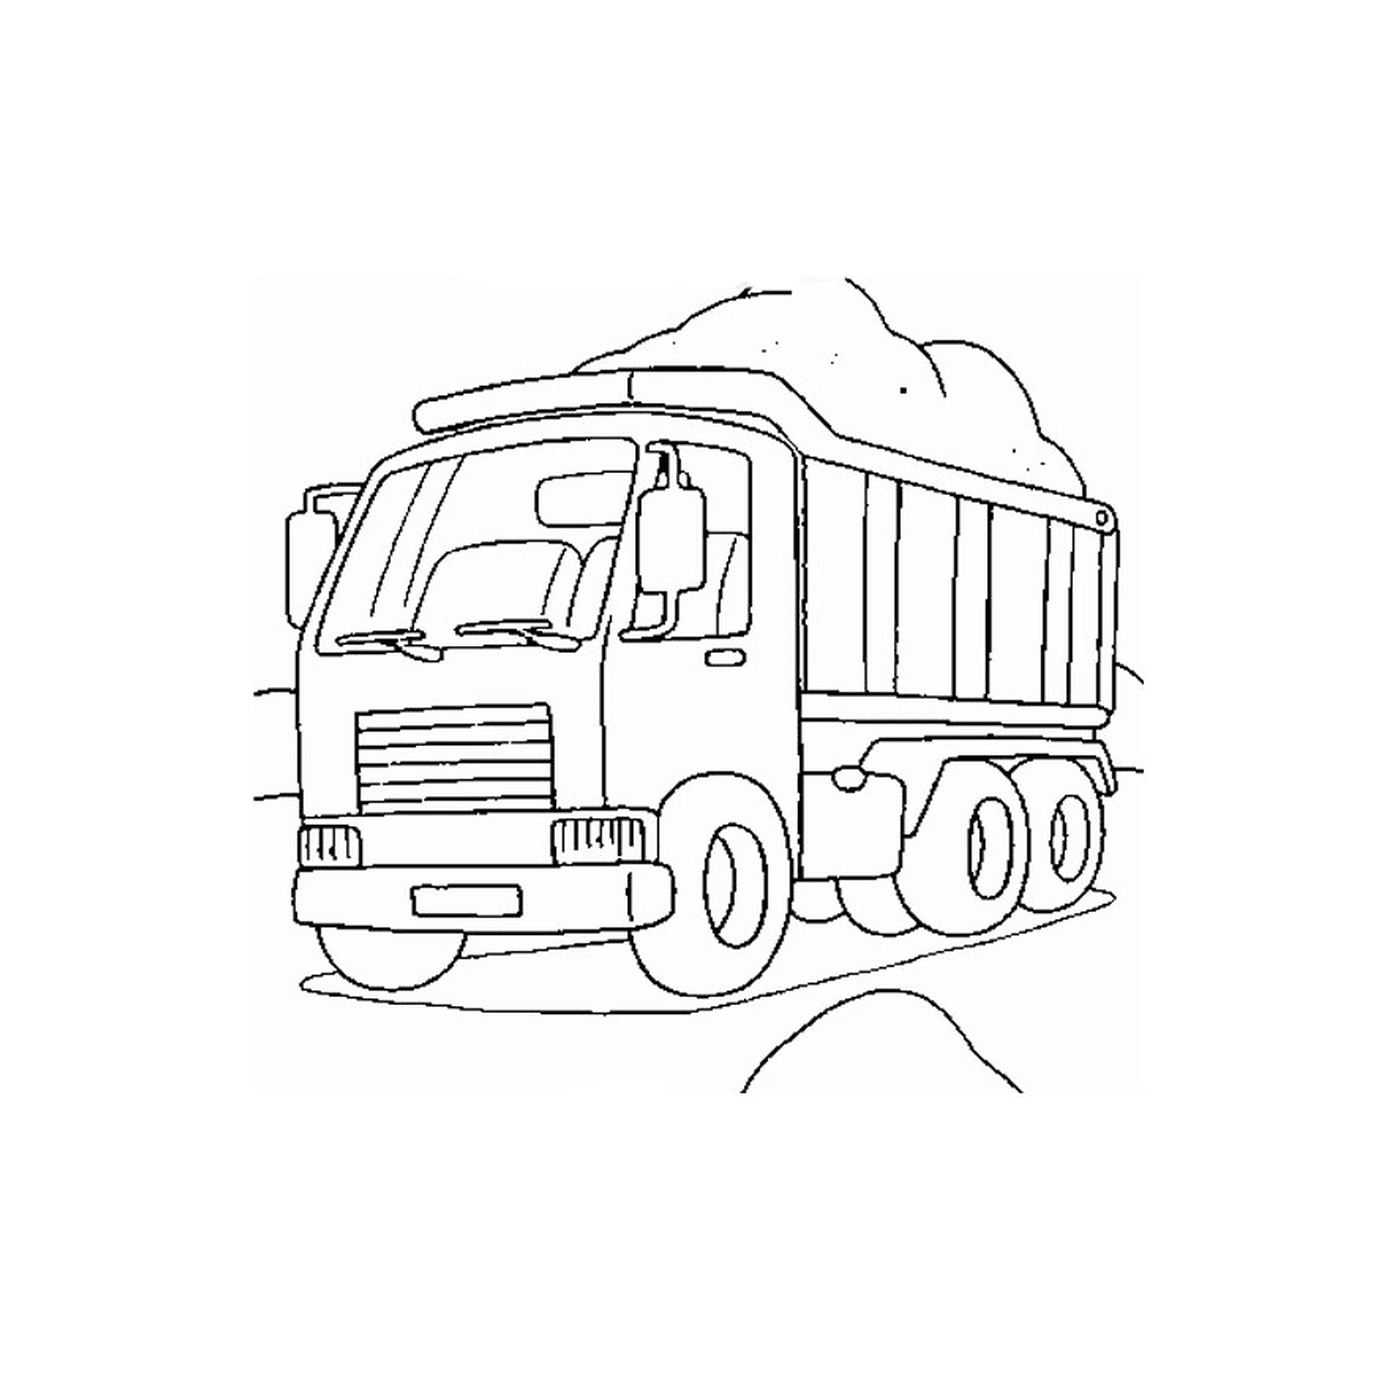  Drawing of a dumpster truck 